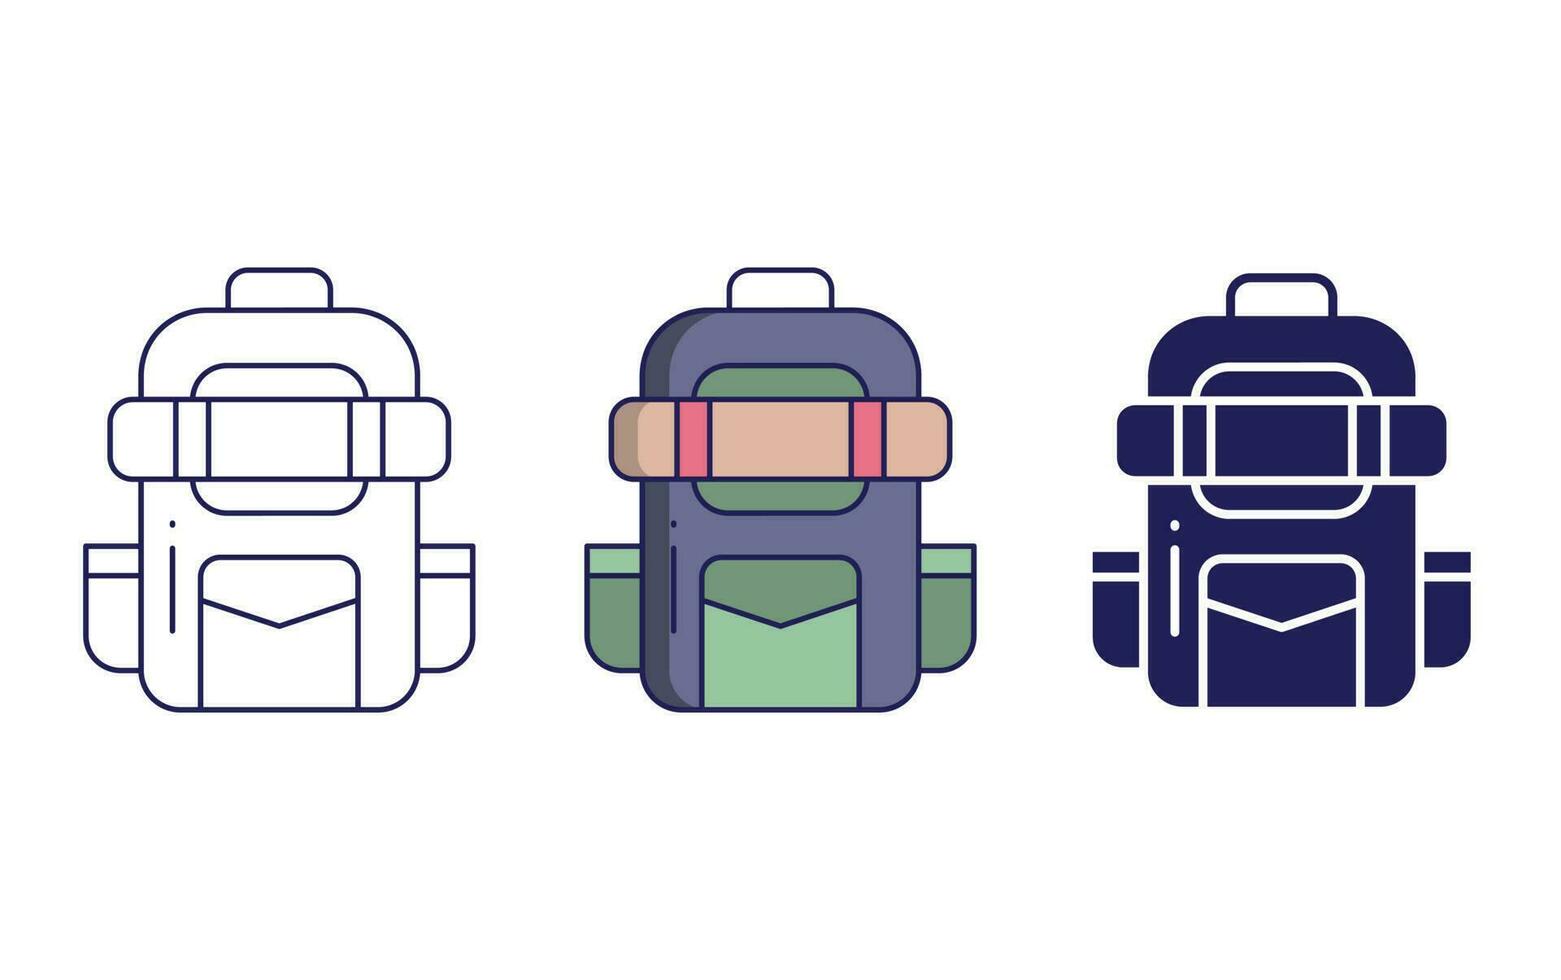 Backpack vector icon